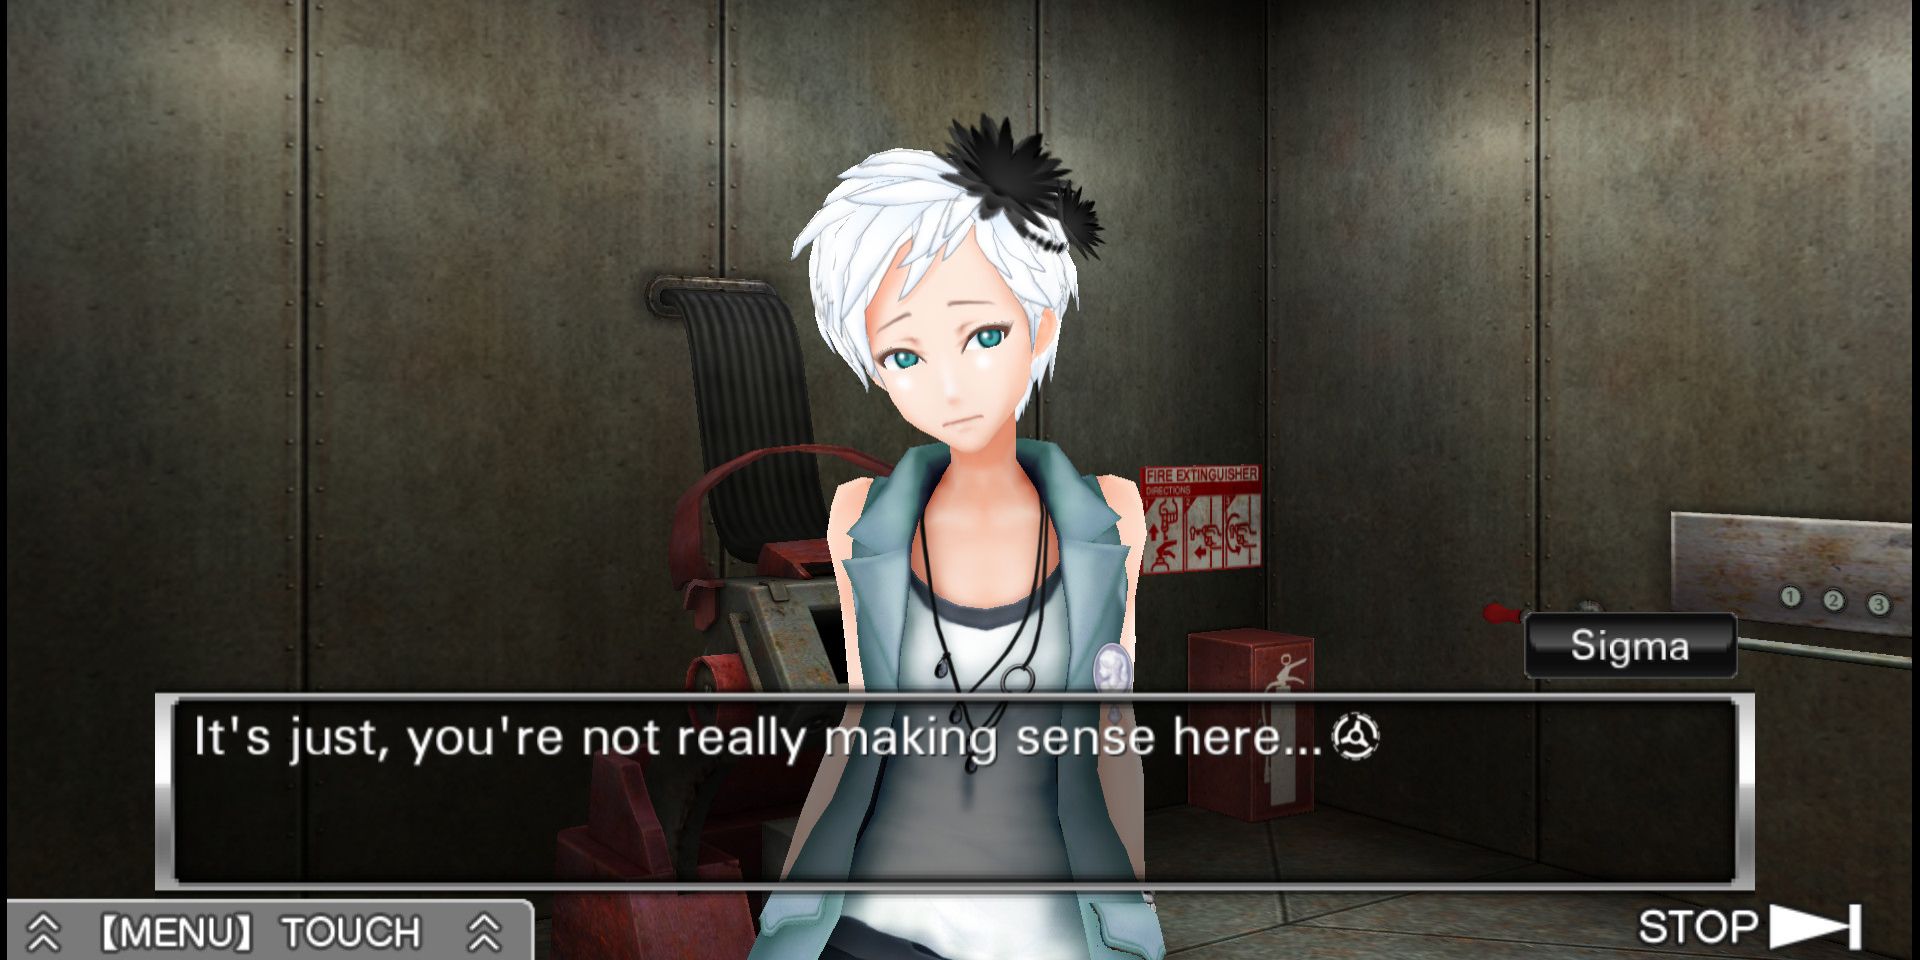 Phi talks to the player with a dialogue box on the bottom of the screen in Zero Escape.